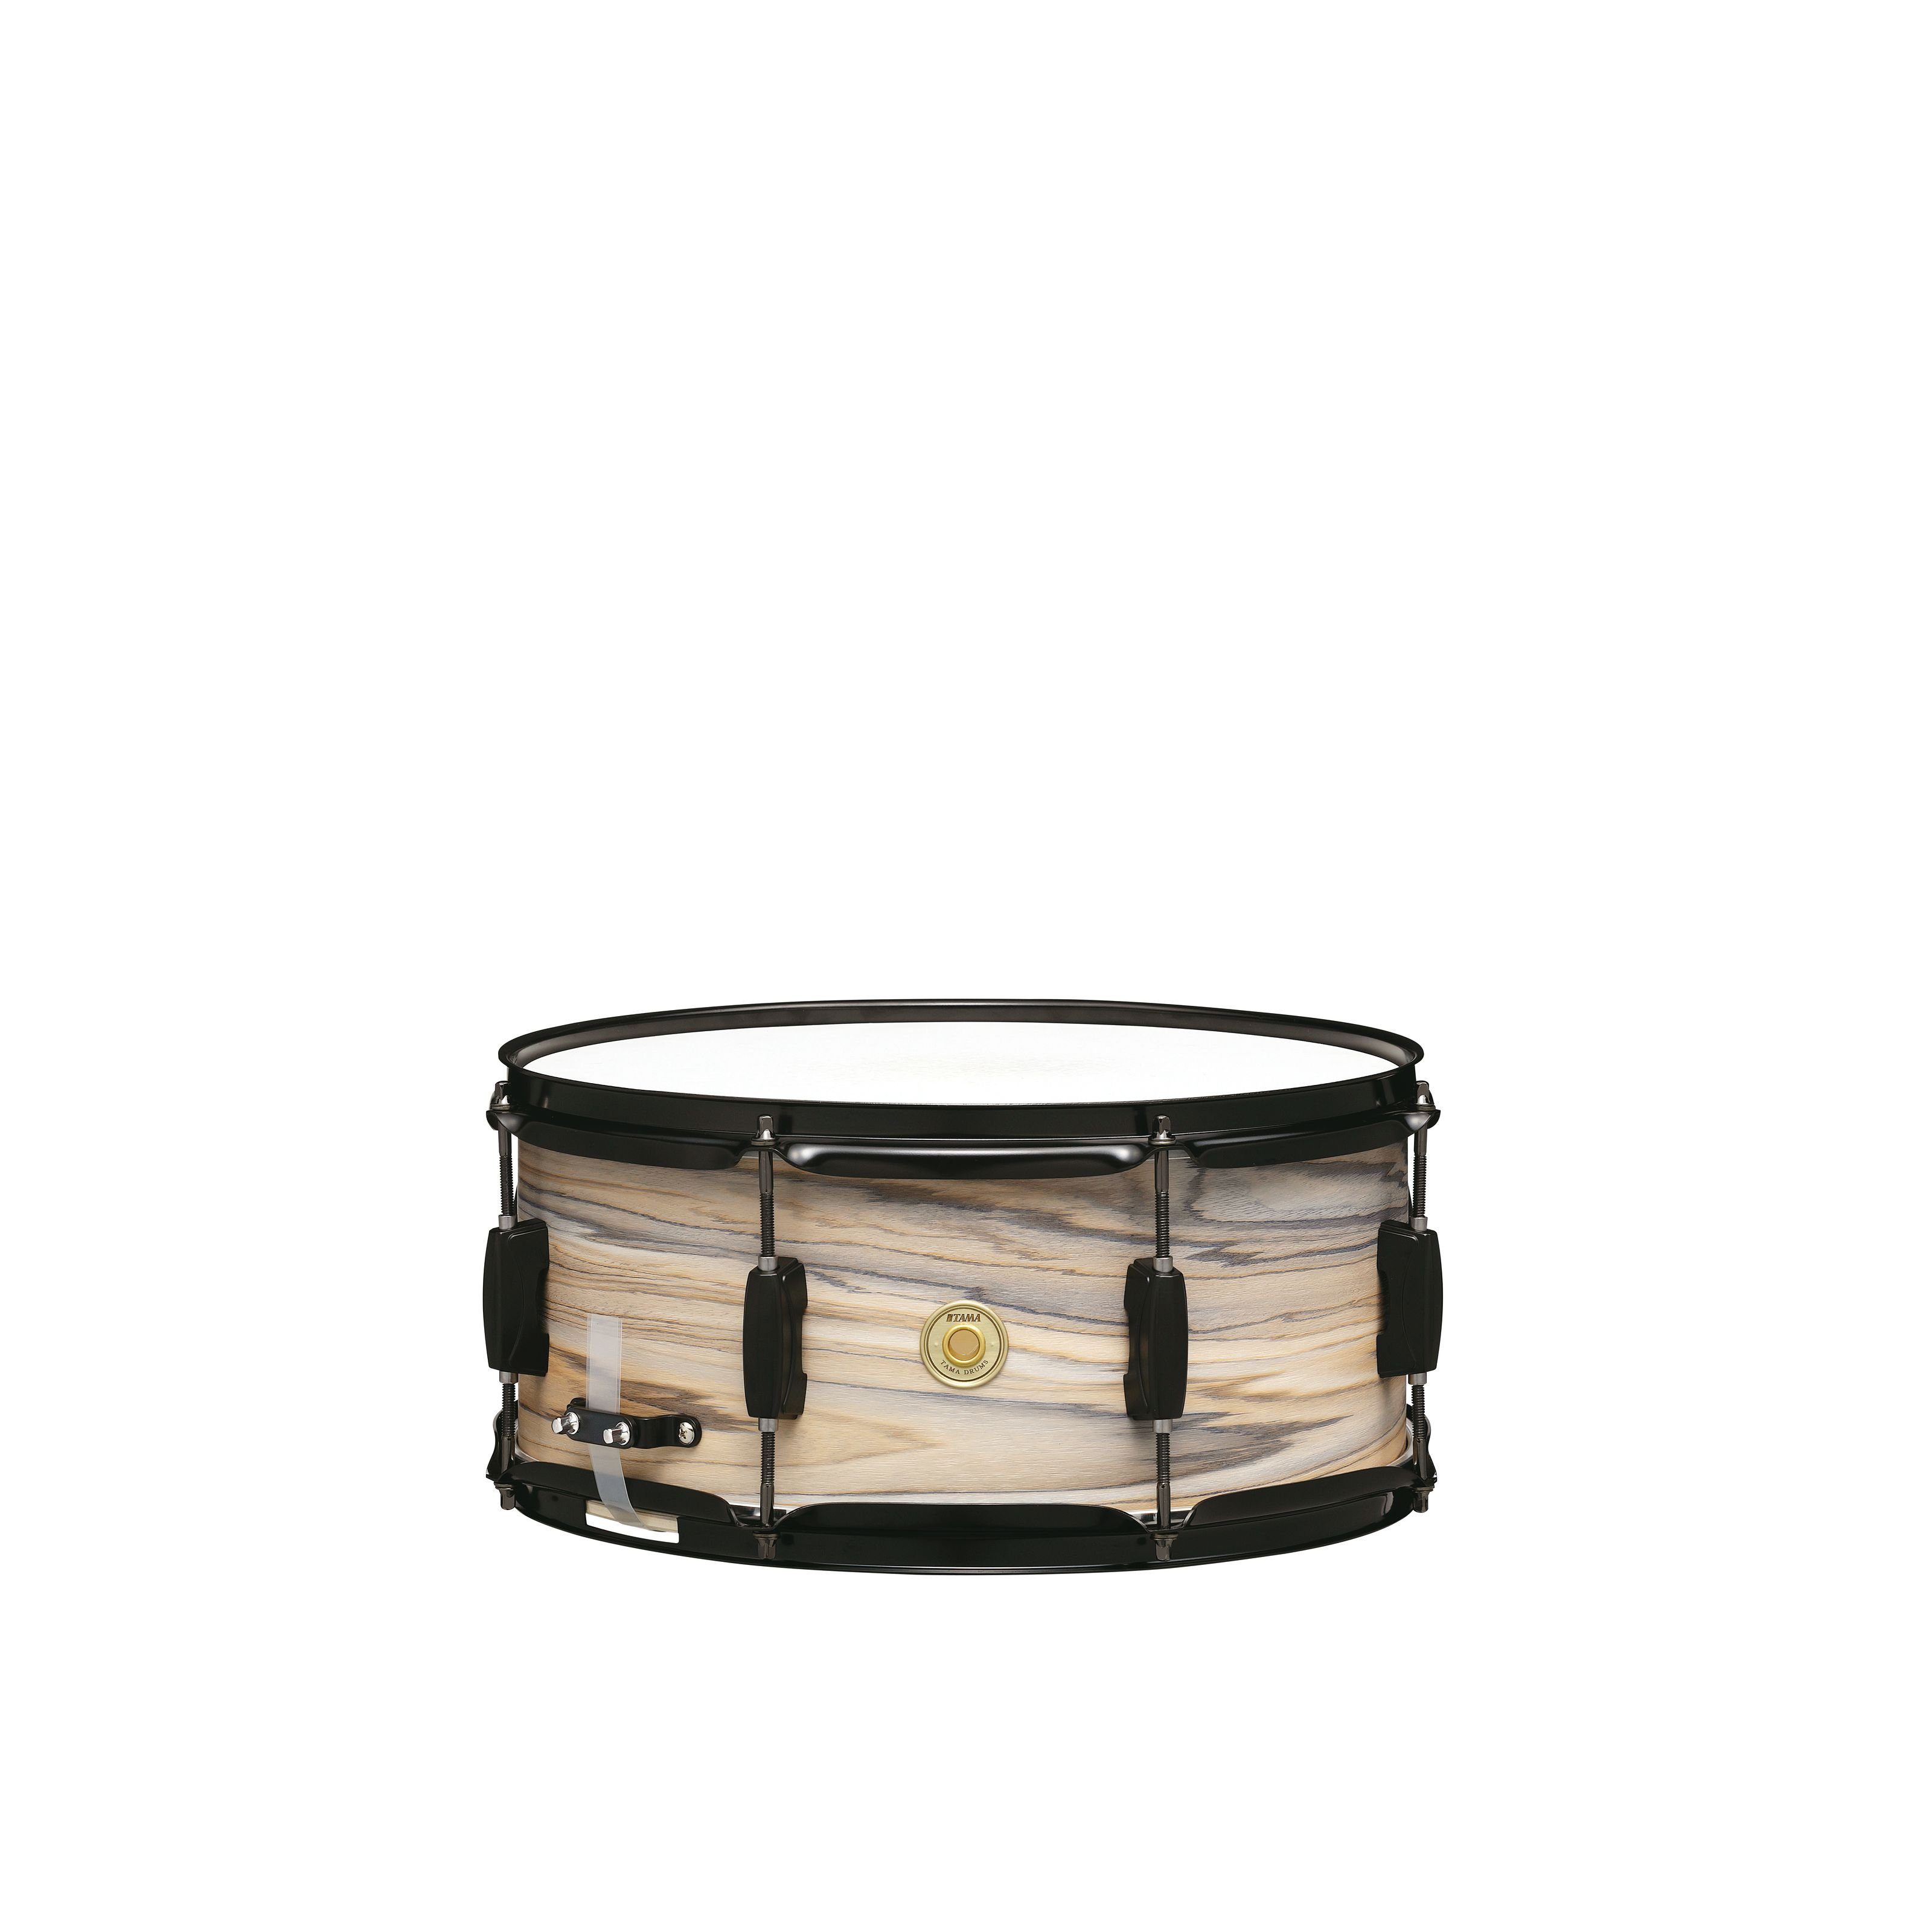 Tama Snare Drum,Woodworks Snare 14"x6,5" Natural Zebrawood Wrap WP1465BK-NZW, Woodworks Snare 14"x6,5" Natural Zebrawood Wrap WP1465BK-NZW - Snare